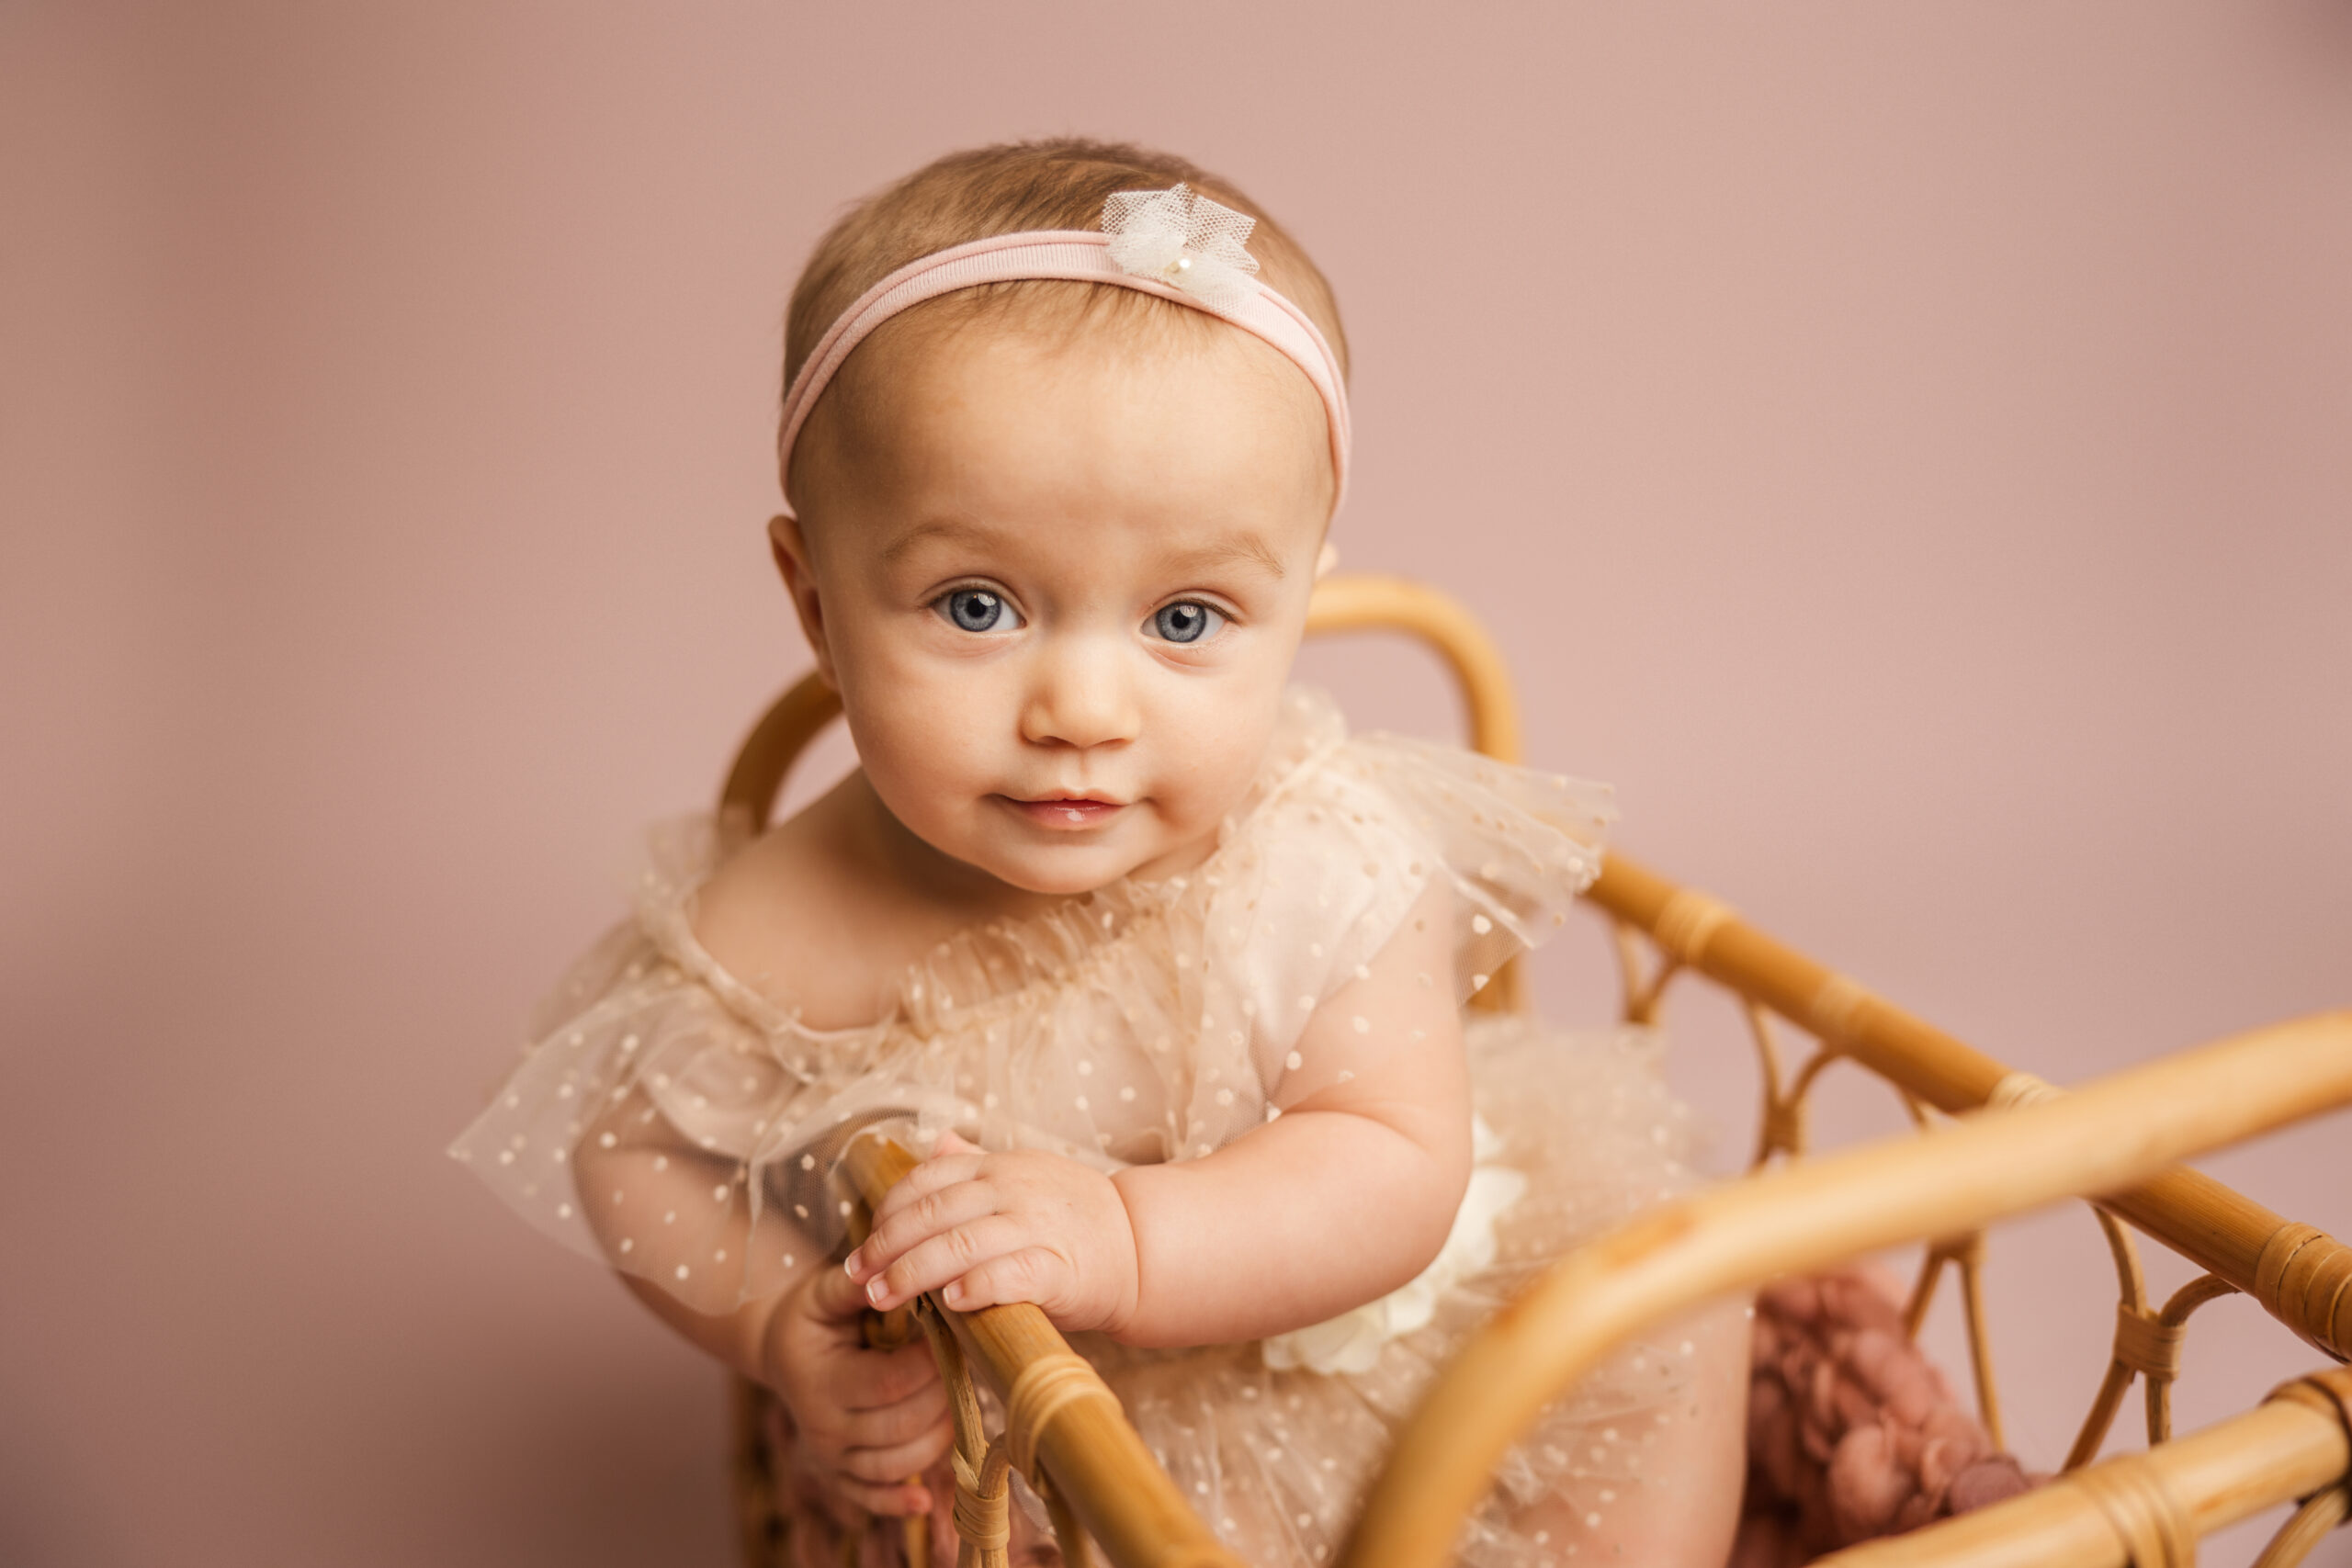 6 month old baby girl sitting in a wicker basket during her milestone studio session with molly berry.

